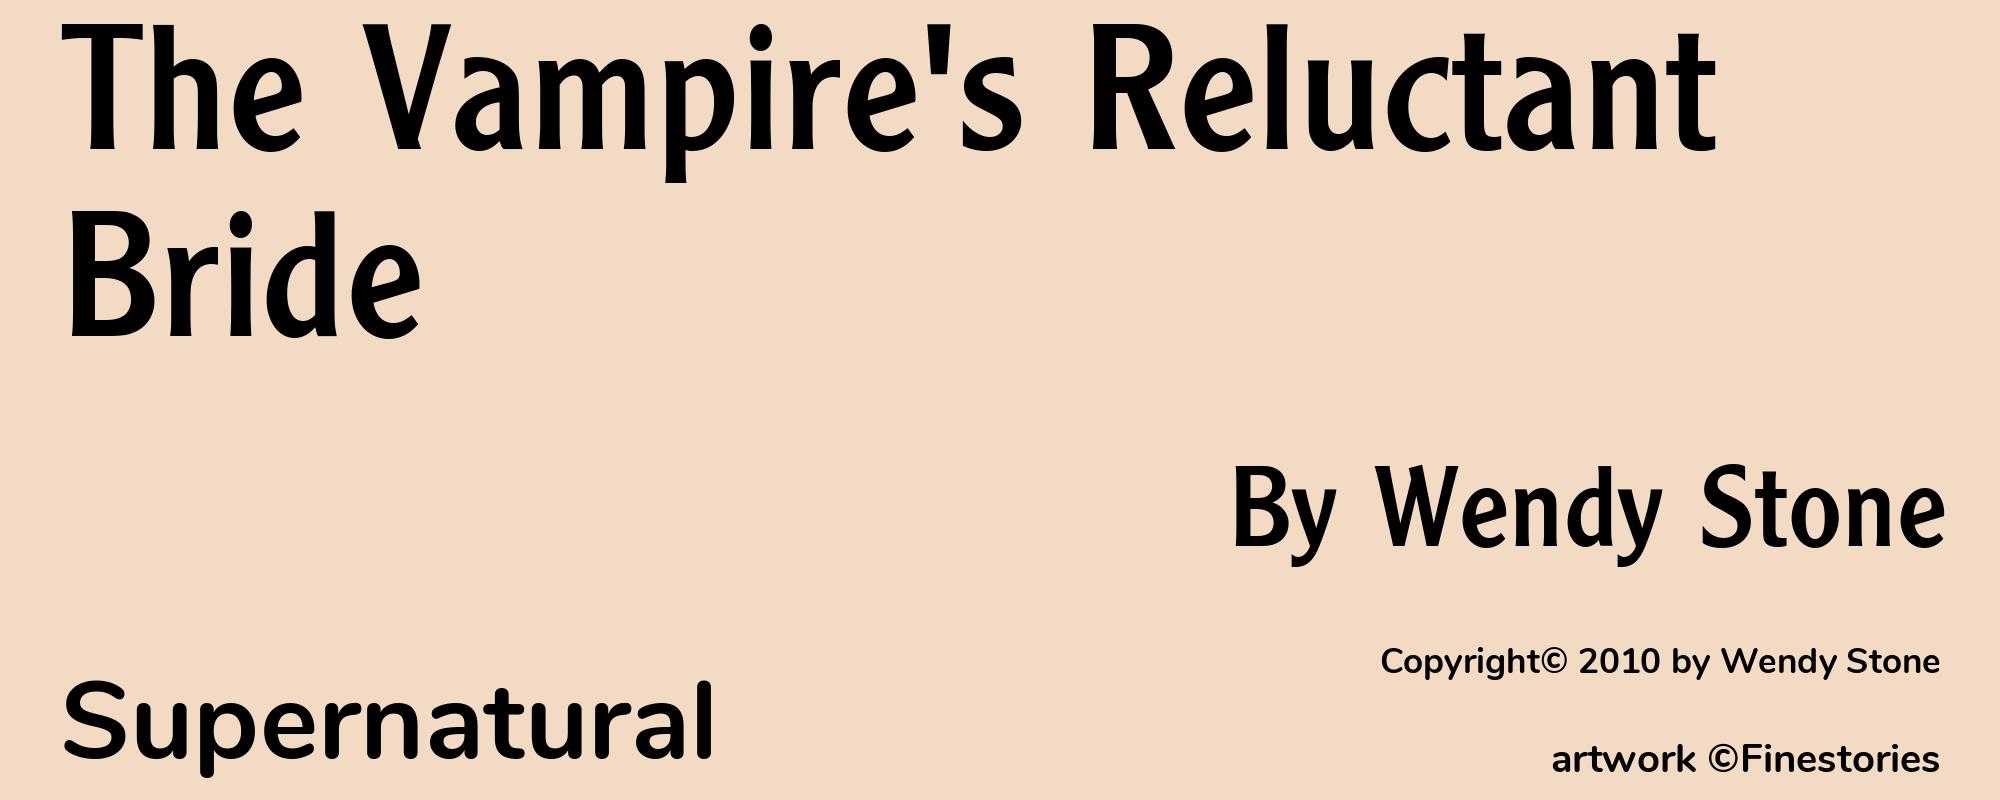 The Vampire's Reluctant Bride - Cover